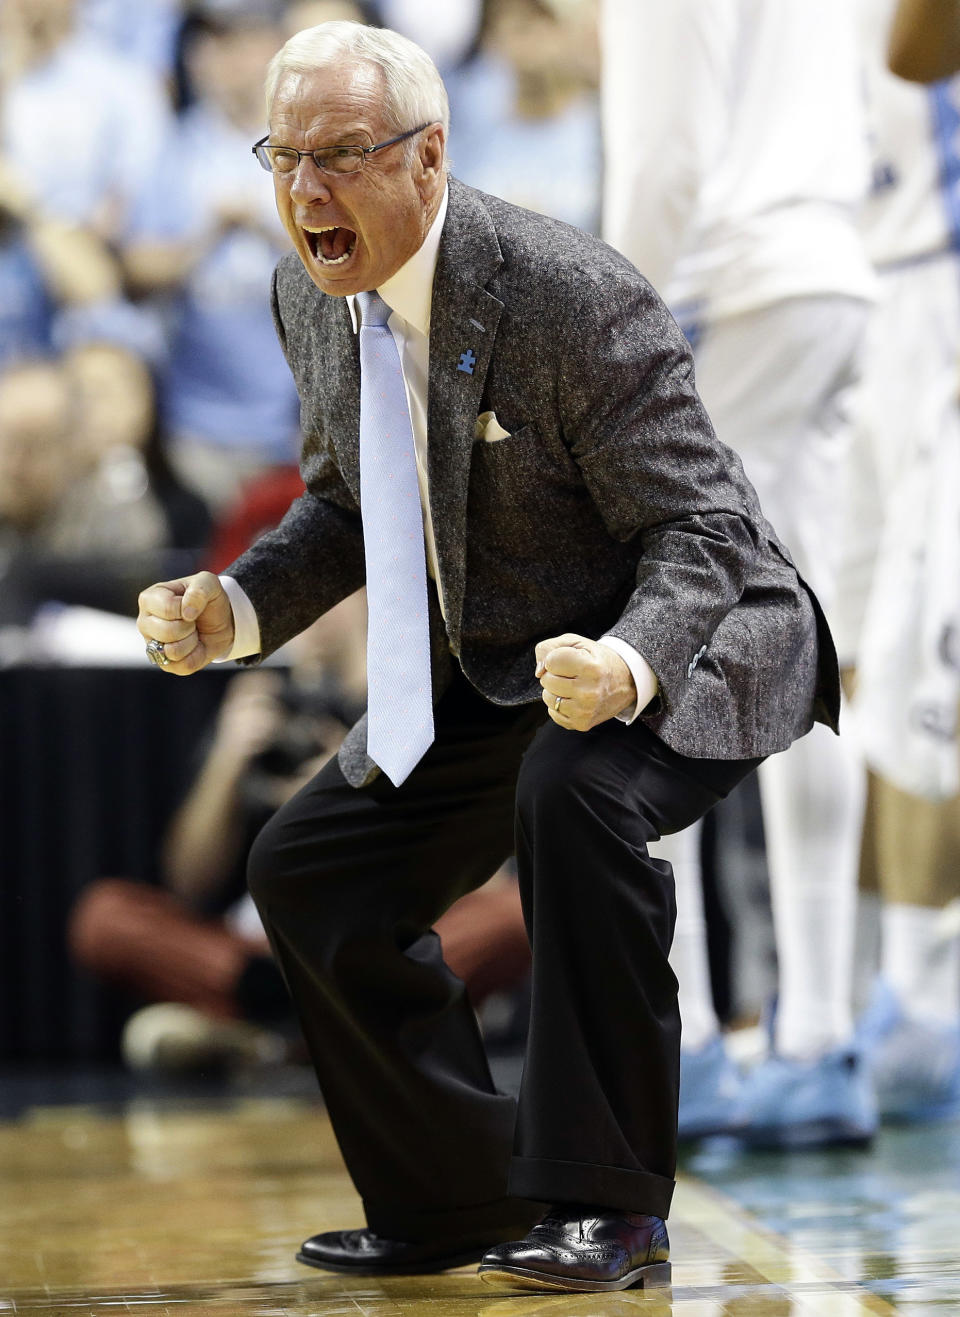 FILE - North Carolina head coach Roy Williams reacts during the second half of an NCAA college basketball game against Notre Dame in Greensboro, N.C., Sunday, Feb. 5, 2017. Roy Williams and Jim Calhoun will join John Beilein and Lon Kruger in a star-studded cast of coaches who will be inducted into the National College Basketball Hall of Fame in November. (AP Photo/Gerry Broome, File)